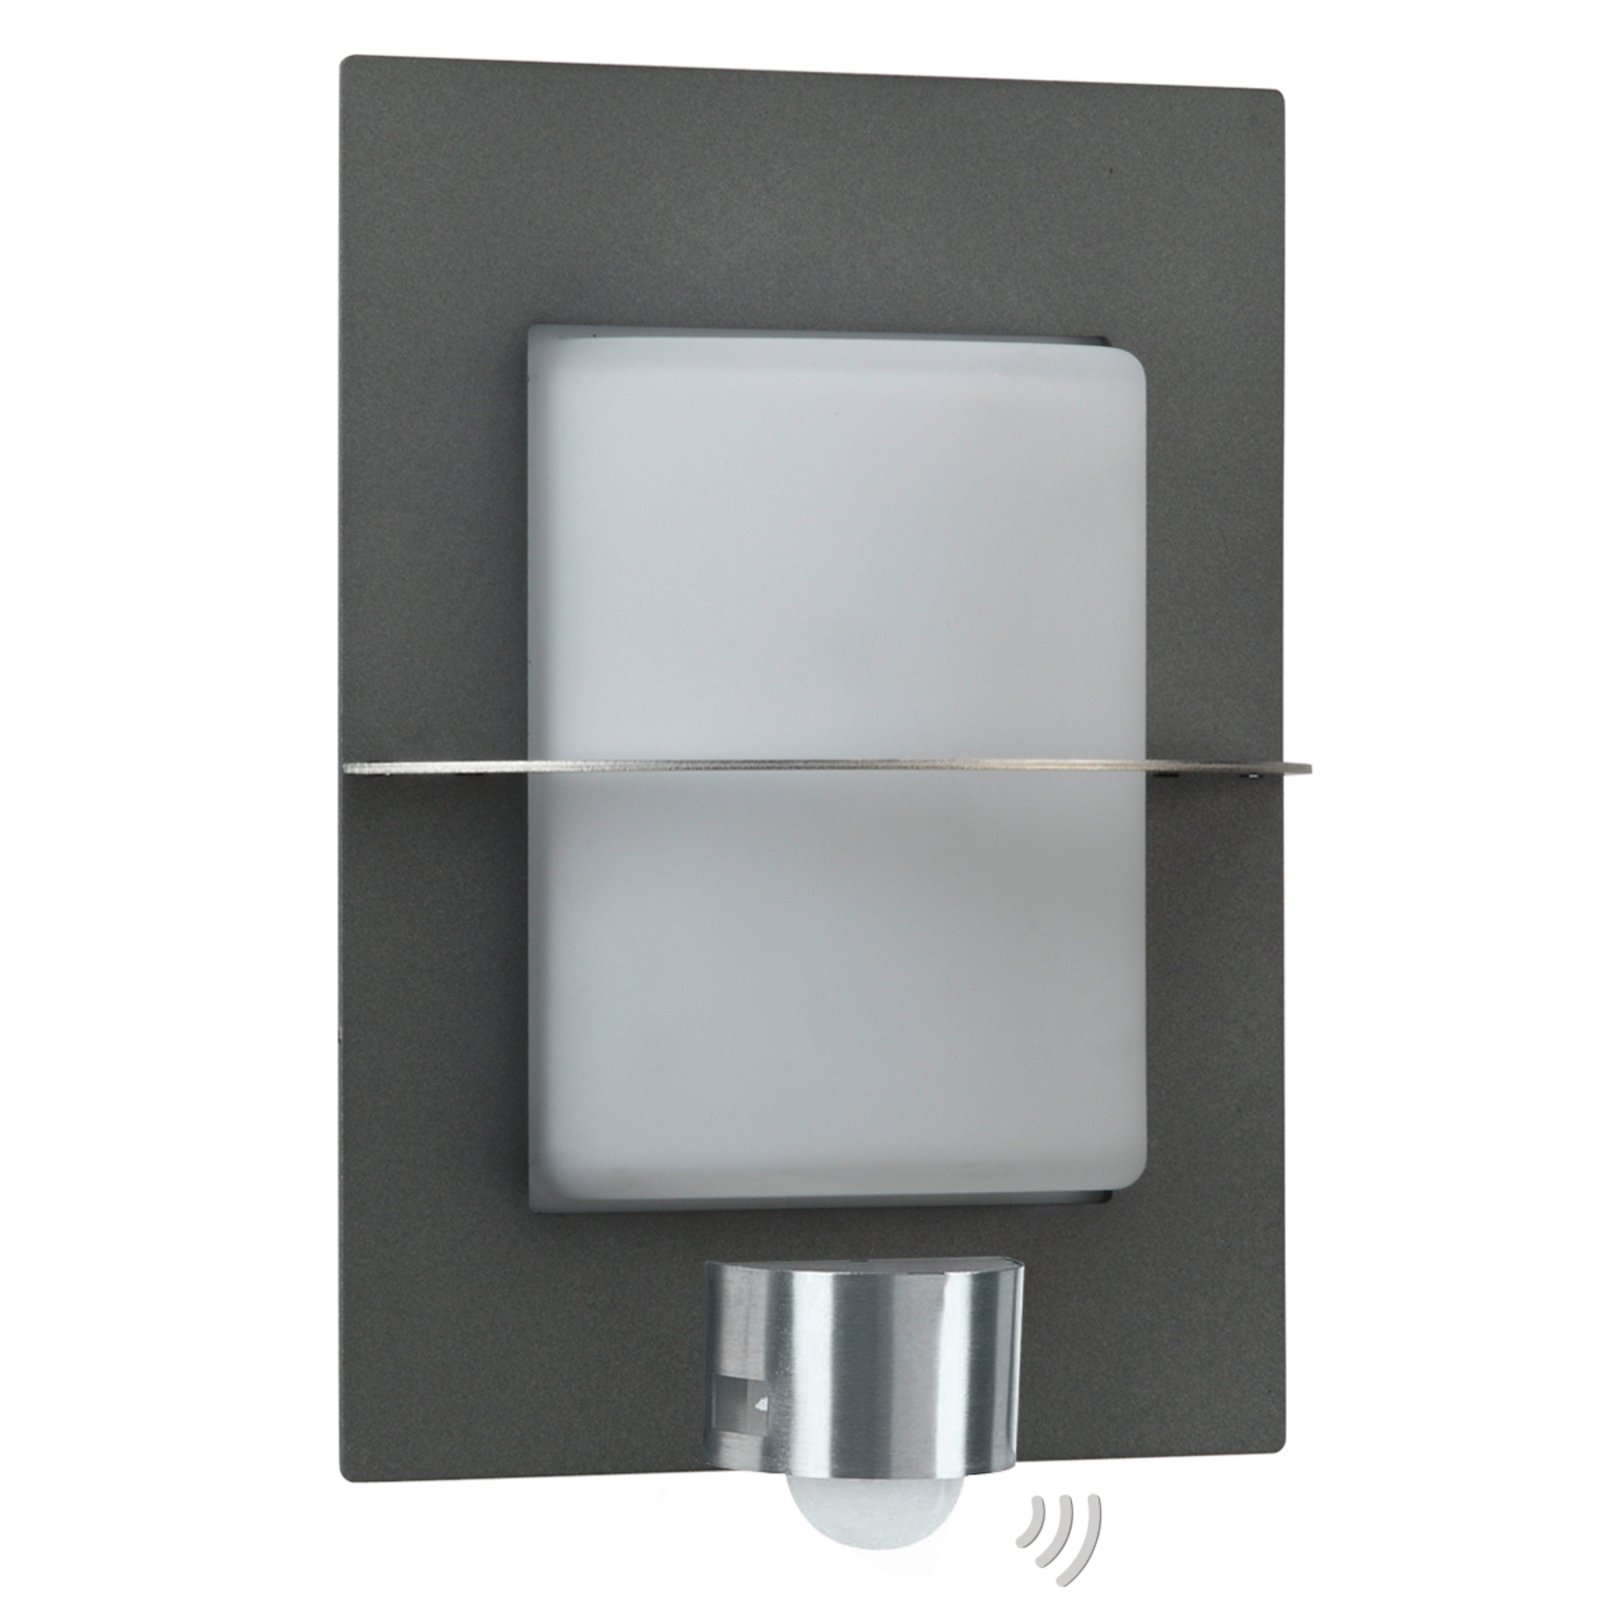 Adelina outdoor wall light with motion detector